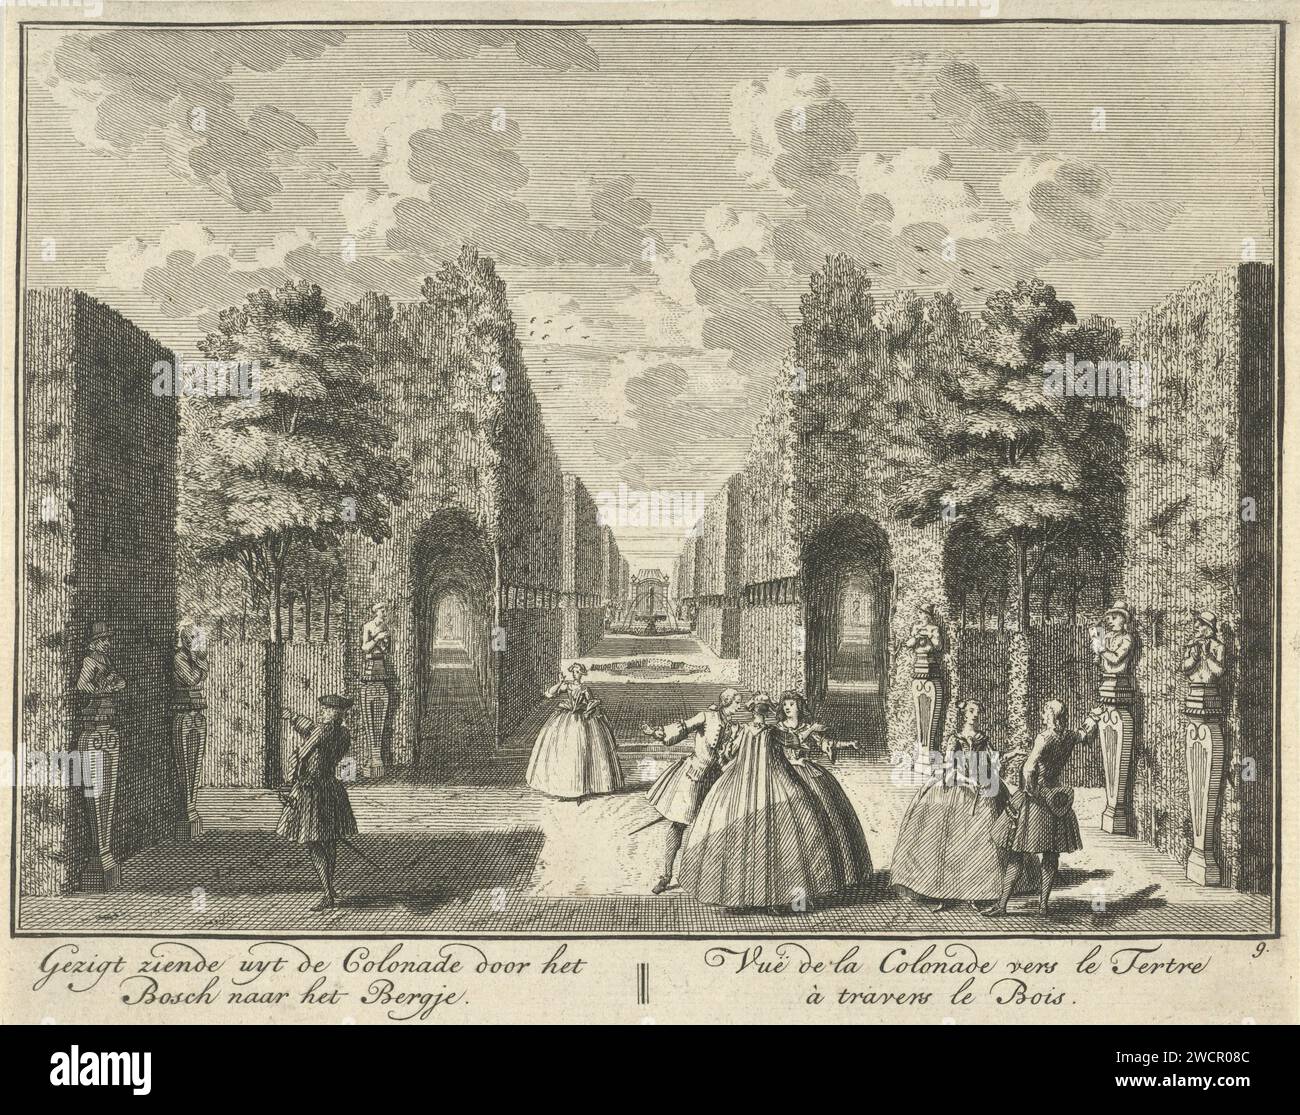 View from the colonnade on the garden of Huis ter Meer in Maarssen, Hendrik de Leth, c. 1740 print View from the colonnade on the French garden of Huis ter Meer in Maarssen, with walking figures. The print is part of a series with 26 faces at Huis ter Meer and the accompanying estate in Maarssen.  paper etching country-house. French or architectonic garden; formal garden House Ter Meer Stock Photo